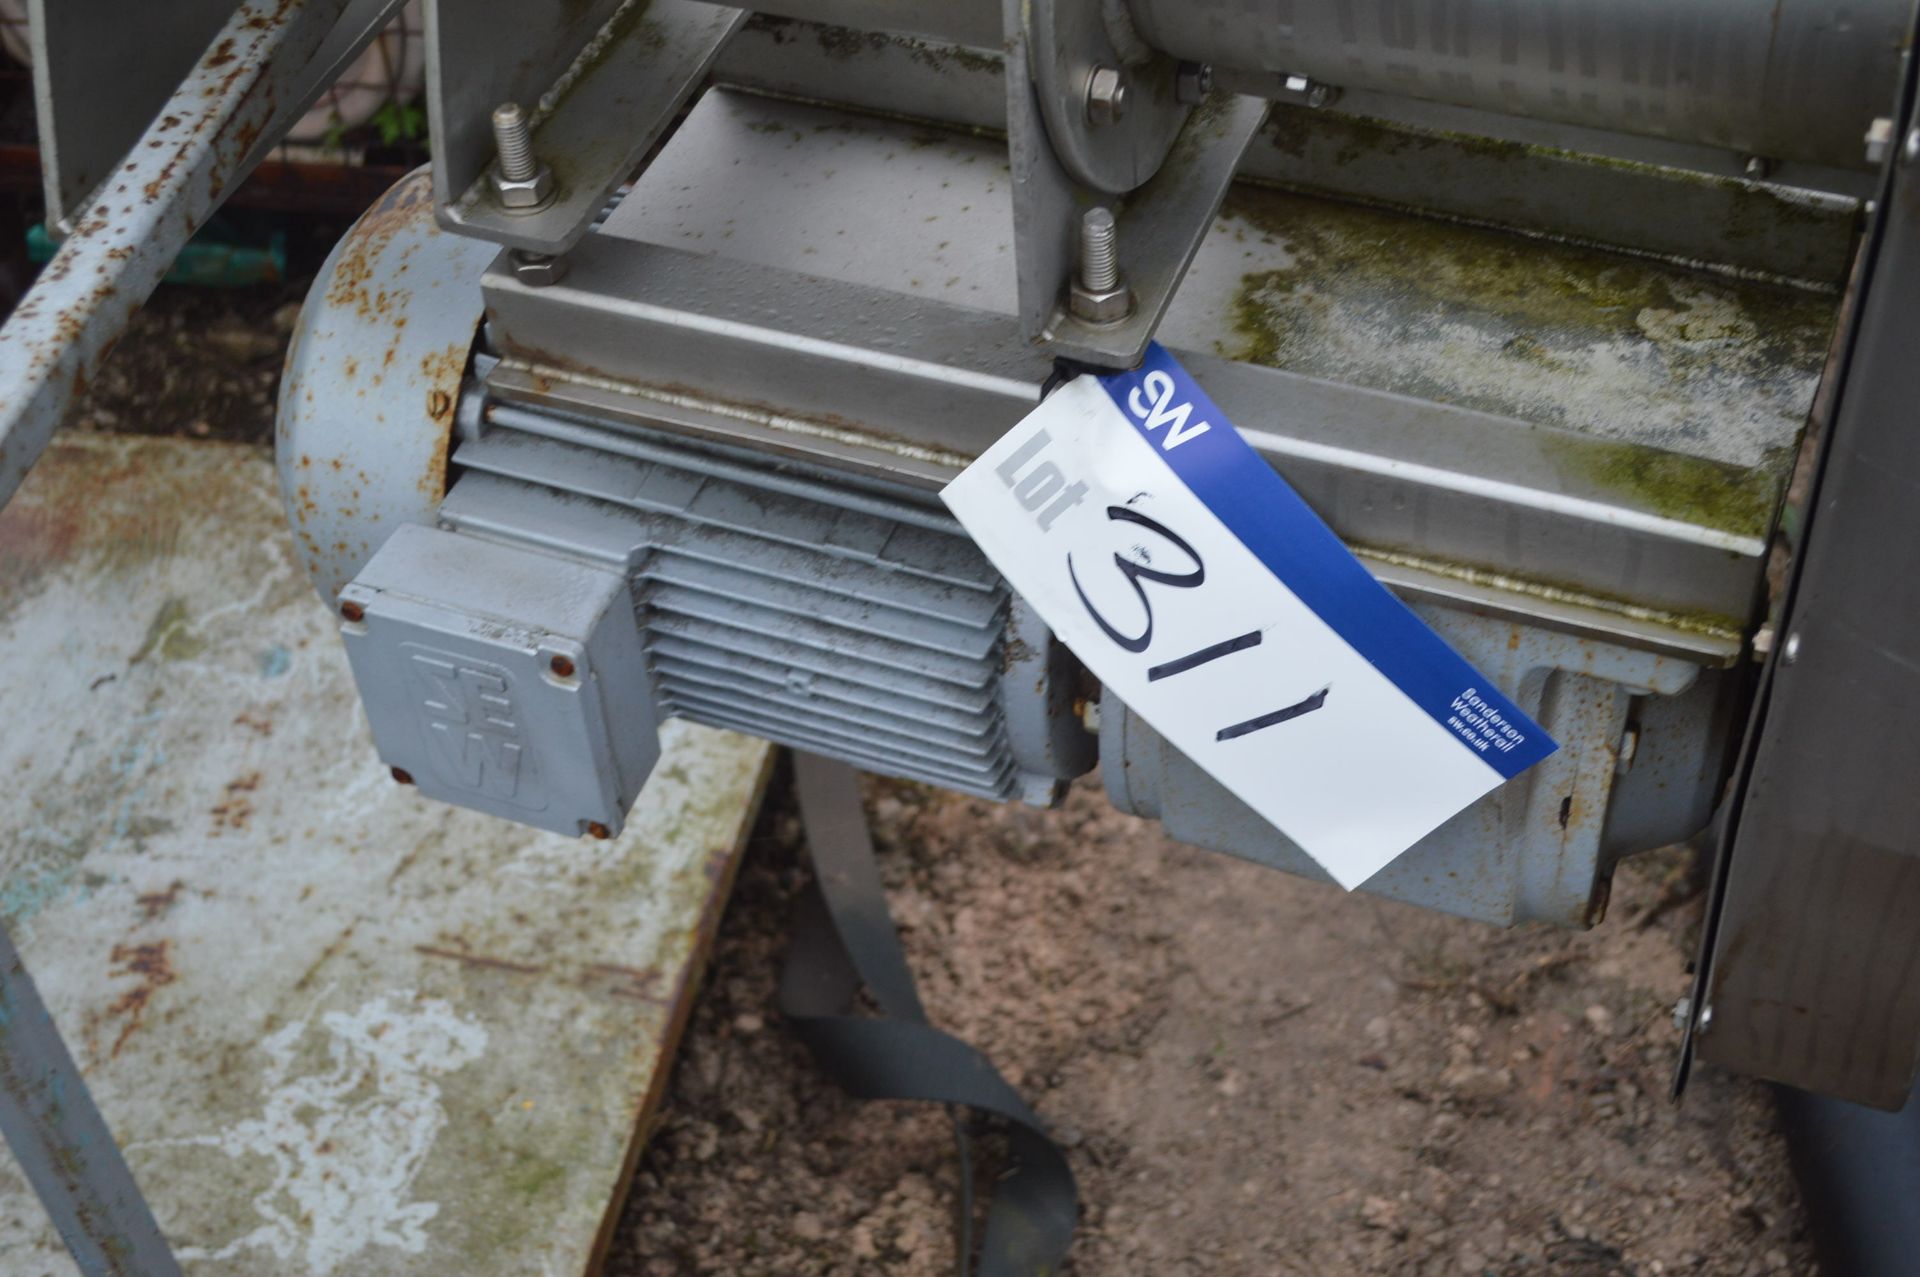 Stainless Steel 150mm dia. Screw Auger Conveyor, a - Image 4 of 4